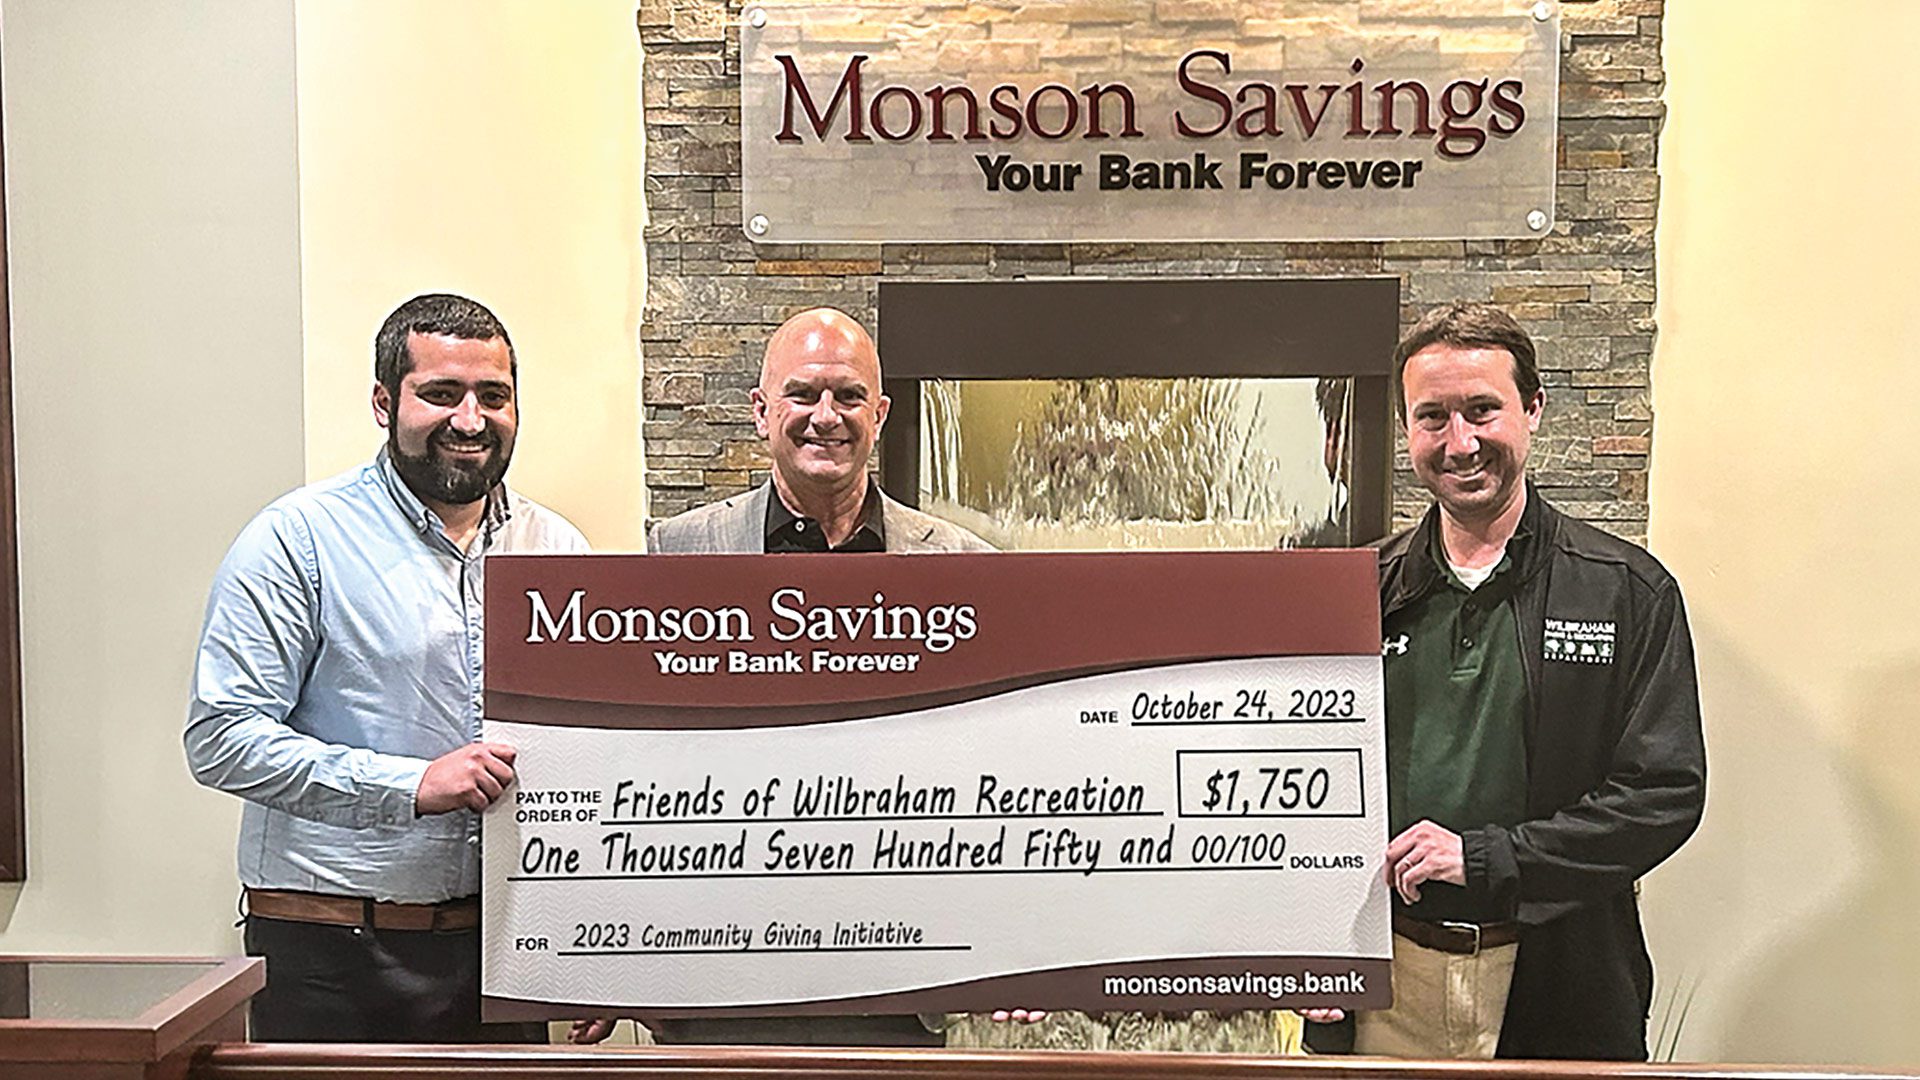 Pictured, from left: Mark Manolakis, Friends of Wilbraham Recreation president; Dan Moriarty, Monson Savings Bank president and CEO; and Bryan Litz, Wilbraham Parks & Recreation director.